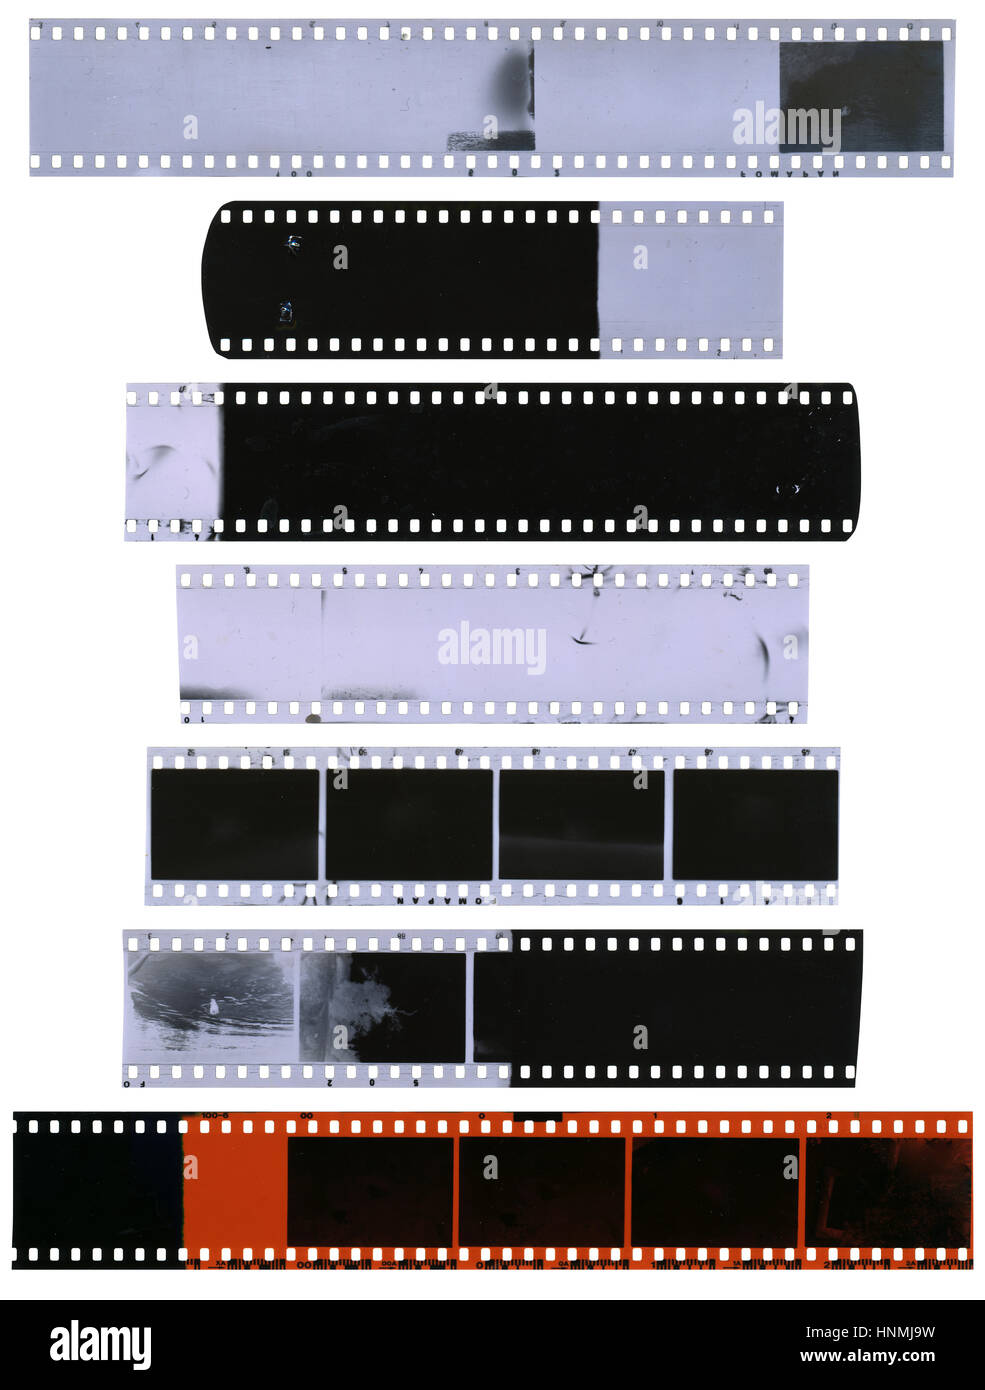 https://c8.alamy.com/comp/HNMJ9W/old-used-dusty-and-scratched-celluloid-film-strips-isolated-on-white-HNMJ9W.jpg